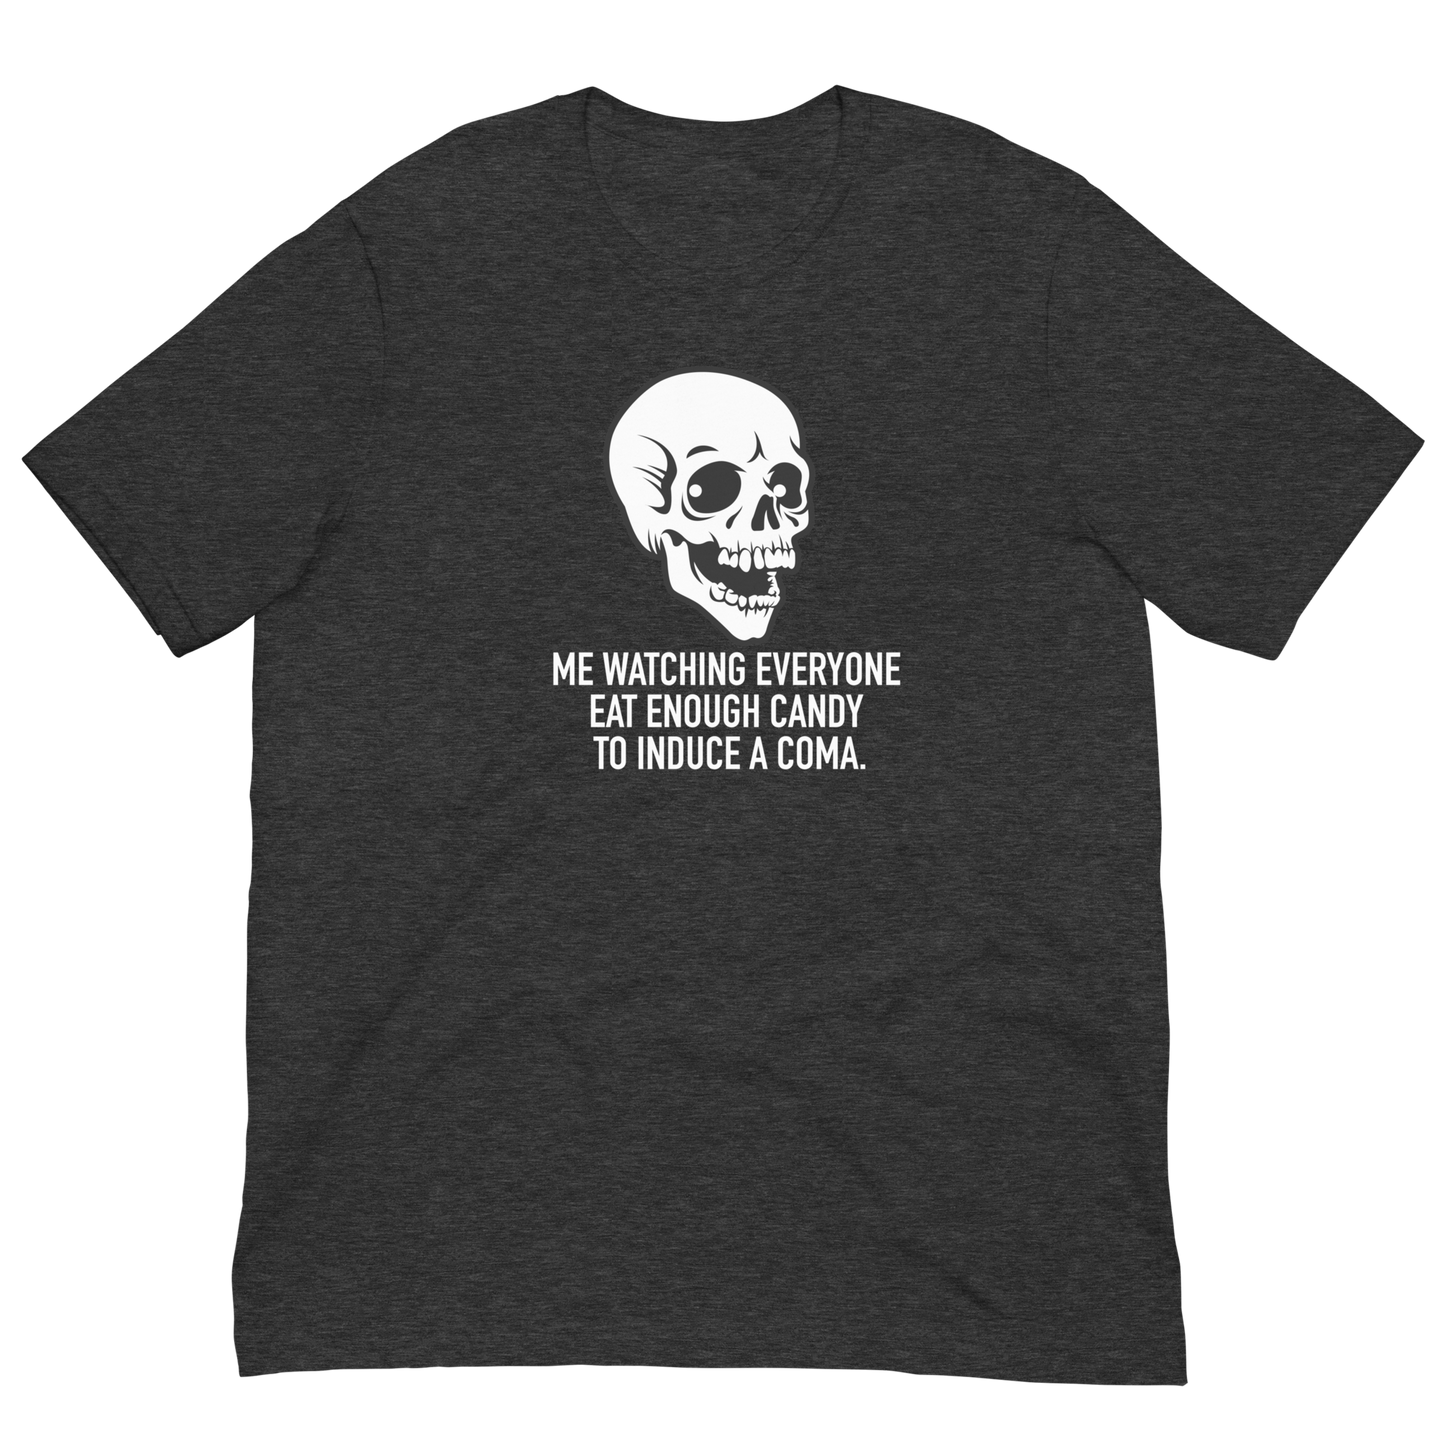 Unisex - Halloween Skeleton Me Watching Everyone Eat Enough Candy to Induce a Coma - Funny T-shirt